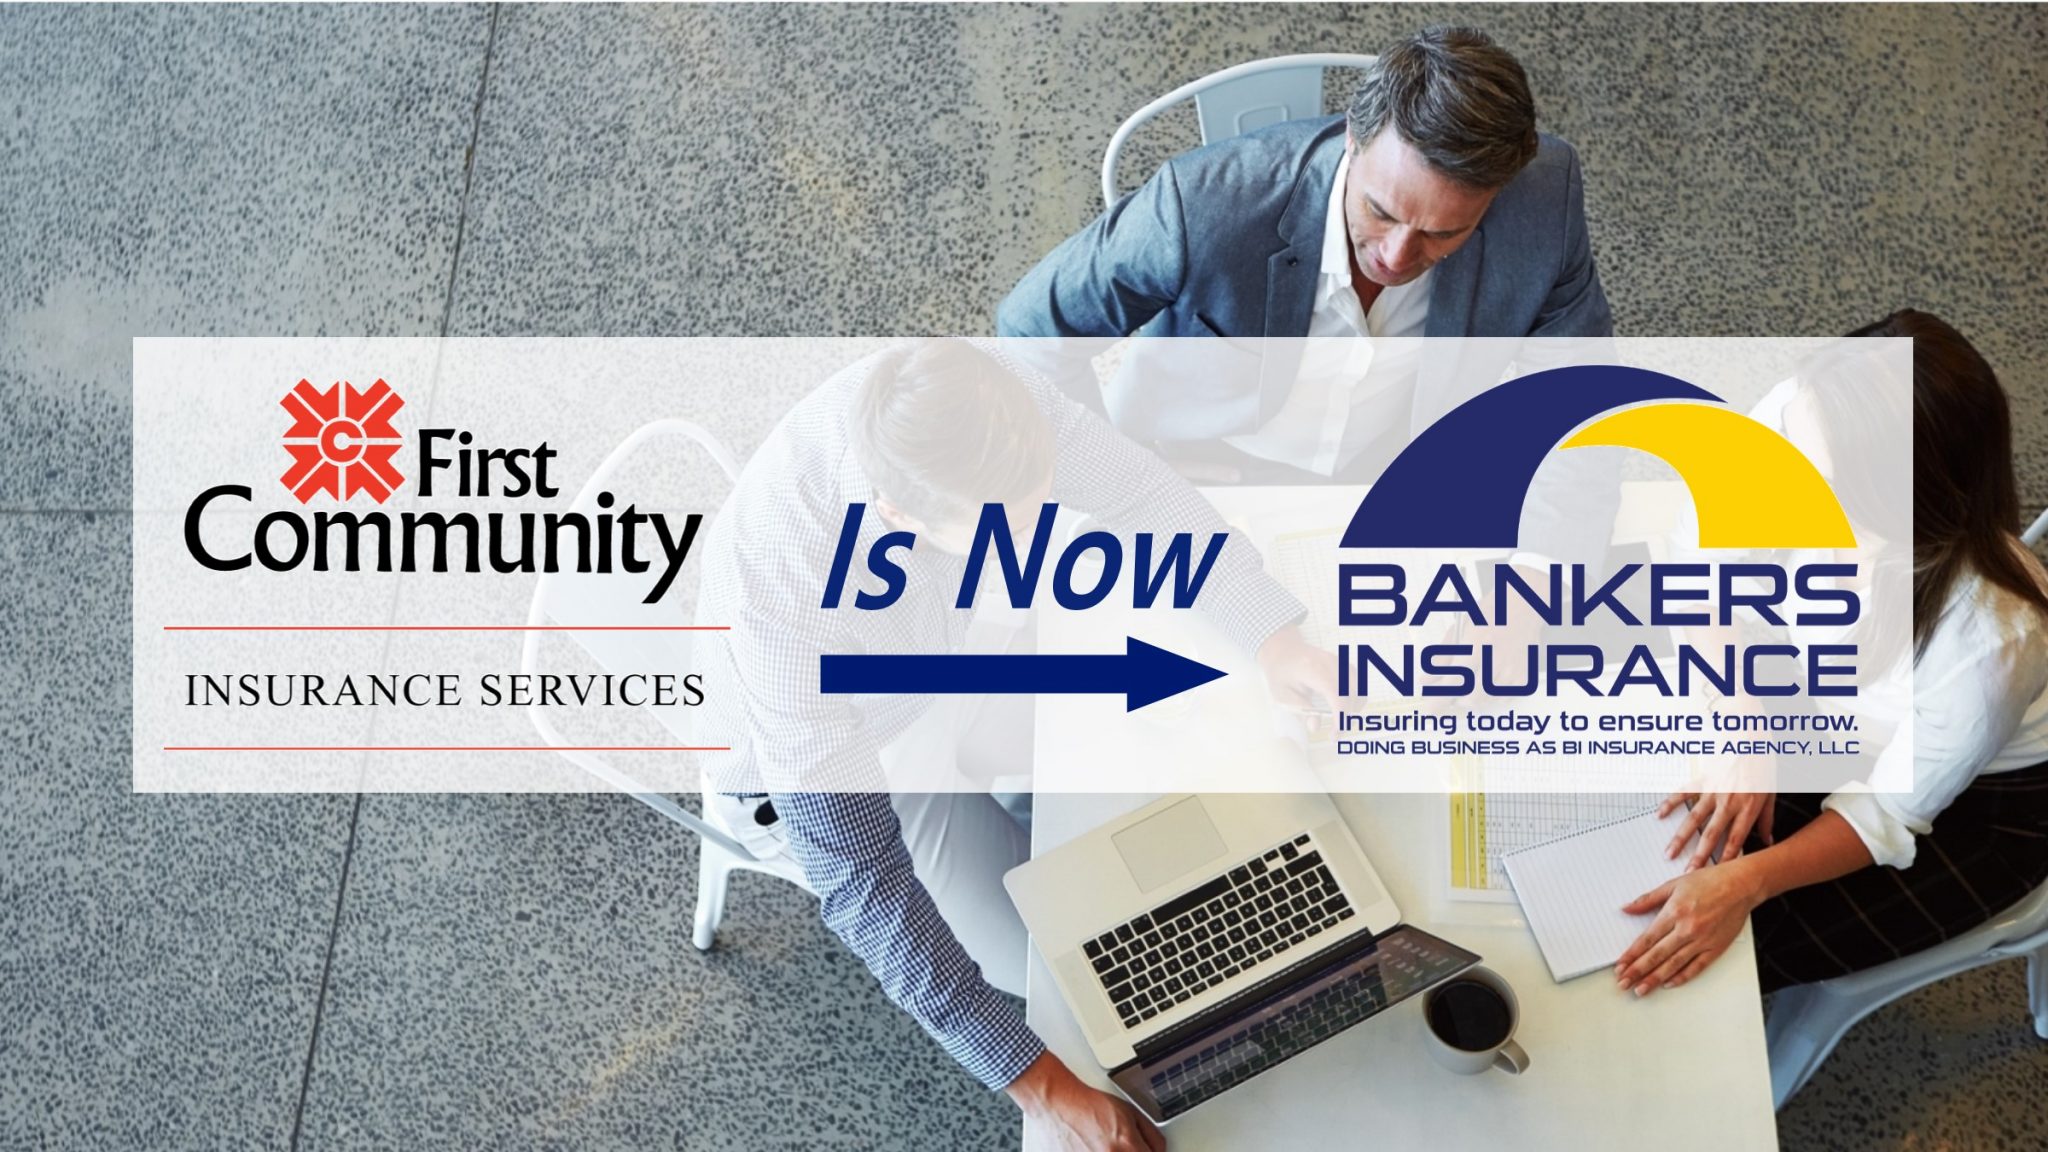 First Community Insurance Services is now Bankers Insurance